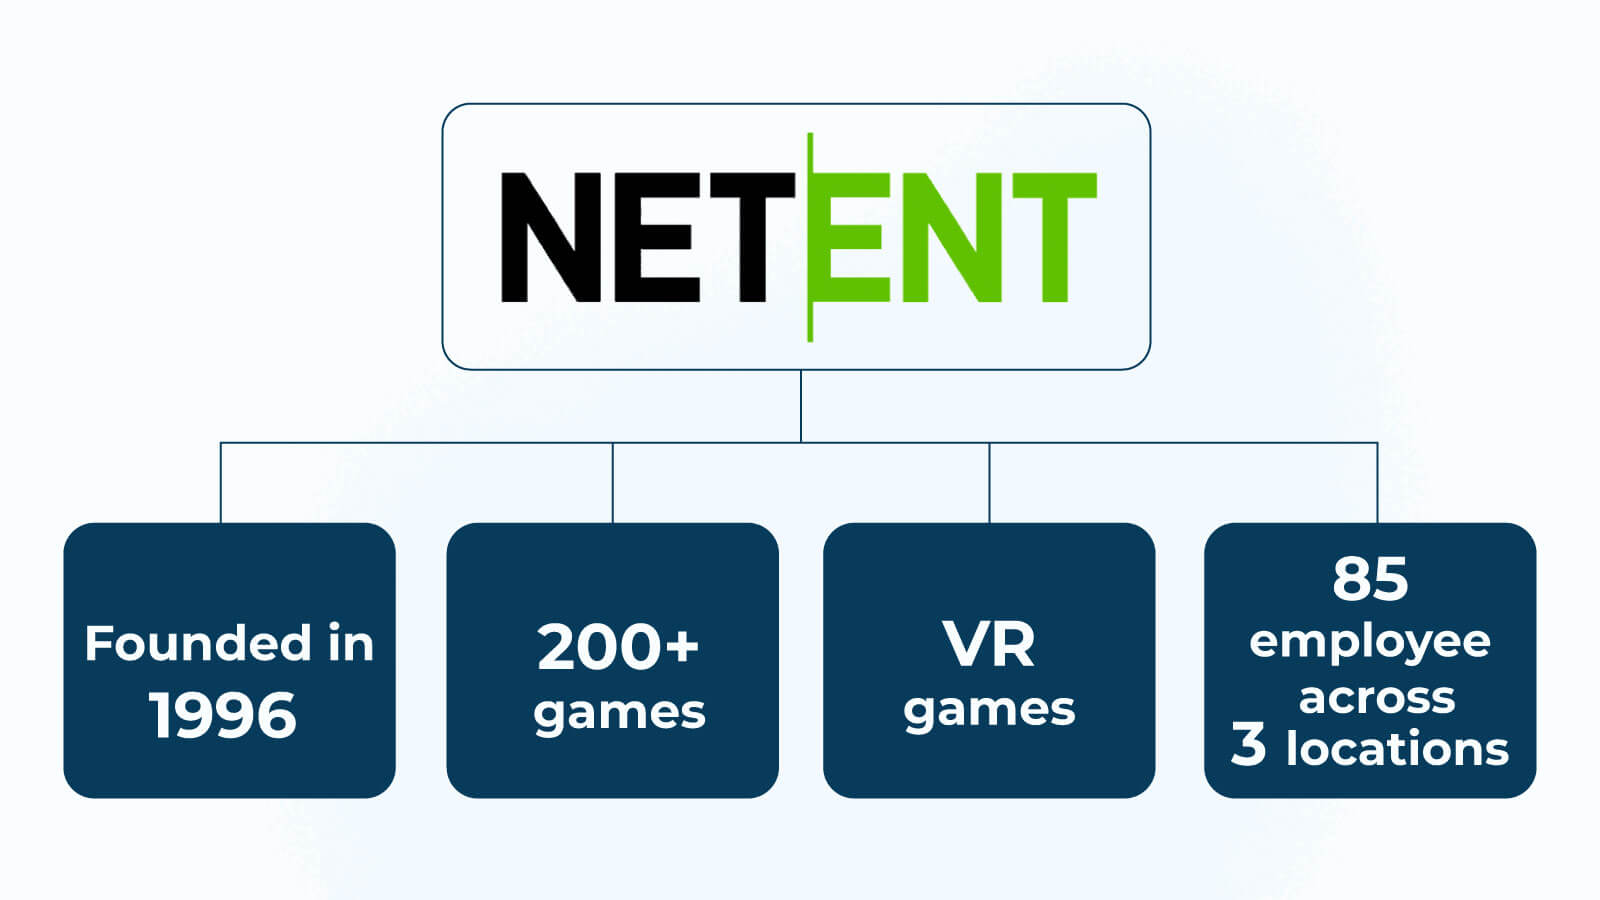 NetEnt Company Overview